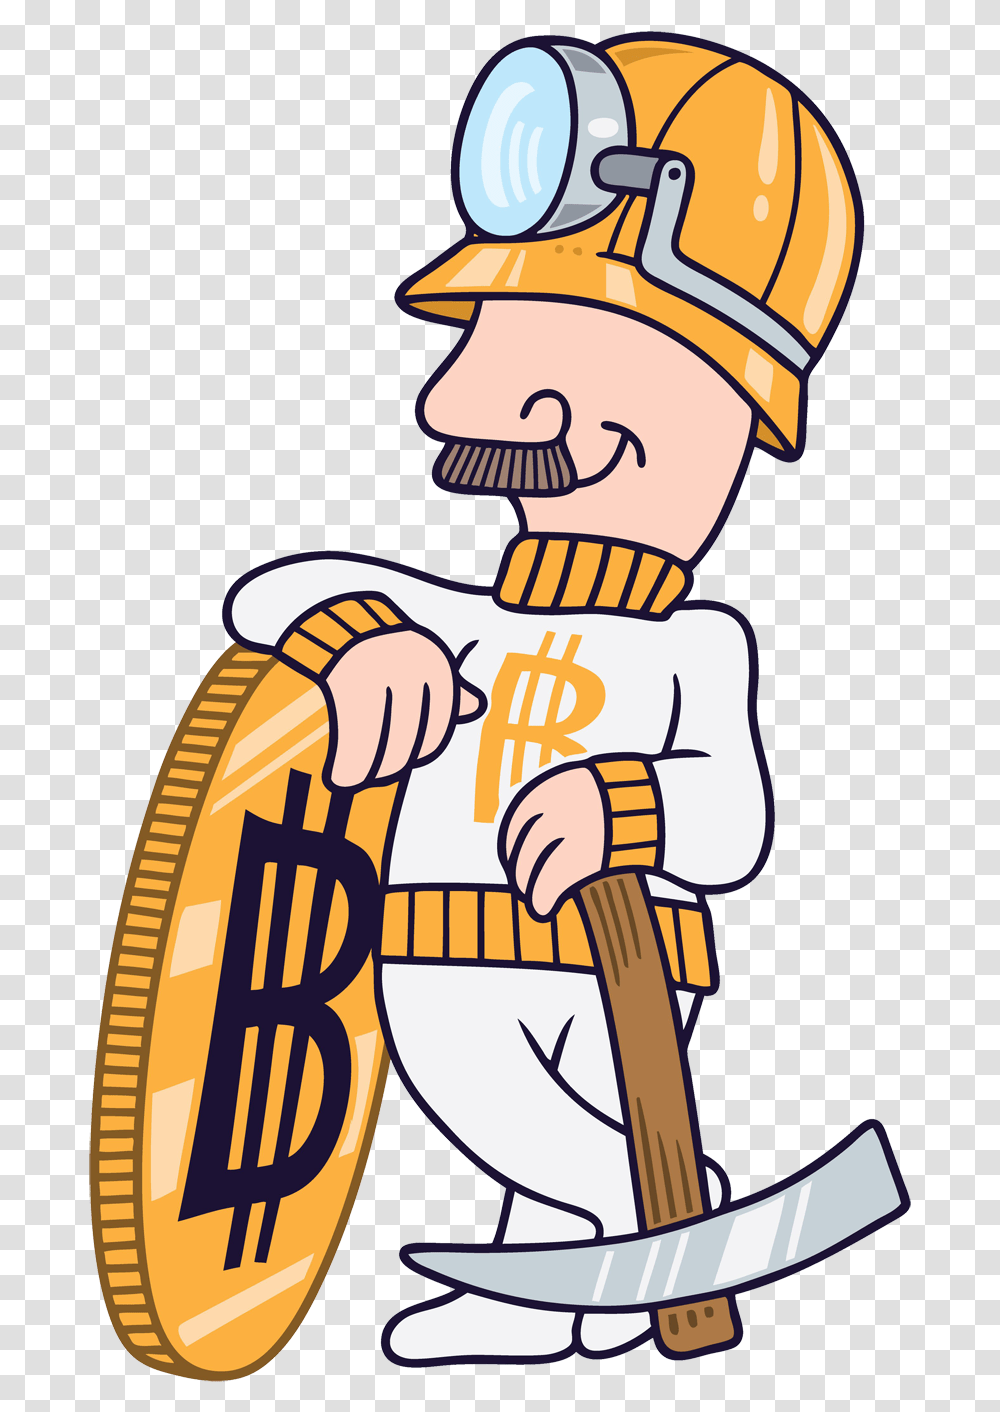 Graphic Royalty Free Mining Clipart Underground Miner Bitcoin, Fireman, Robot, Label Transparent Png